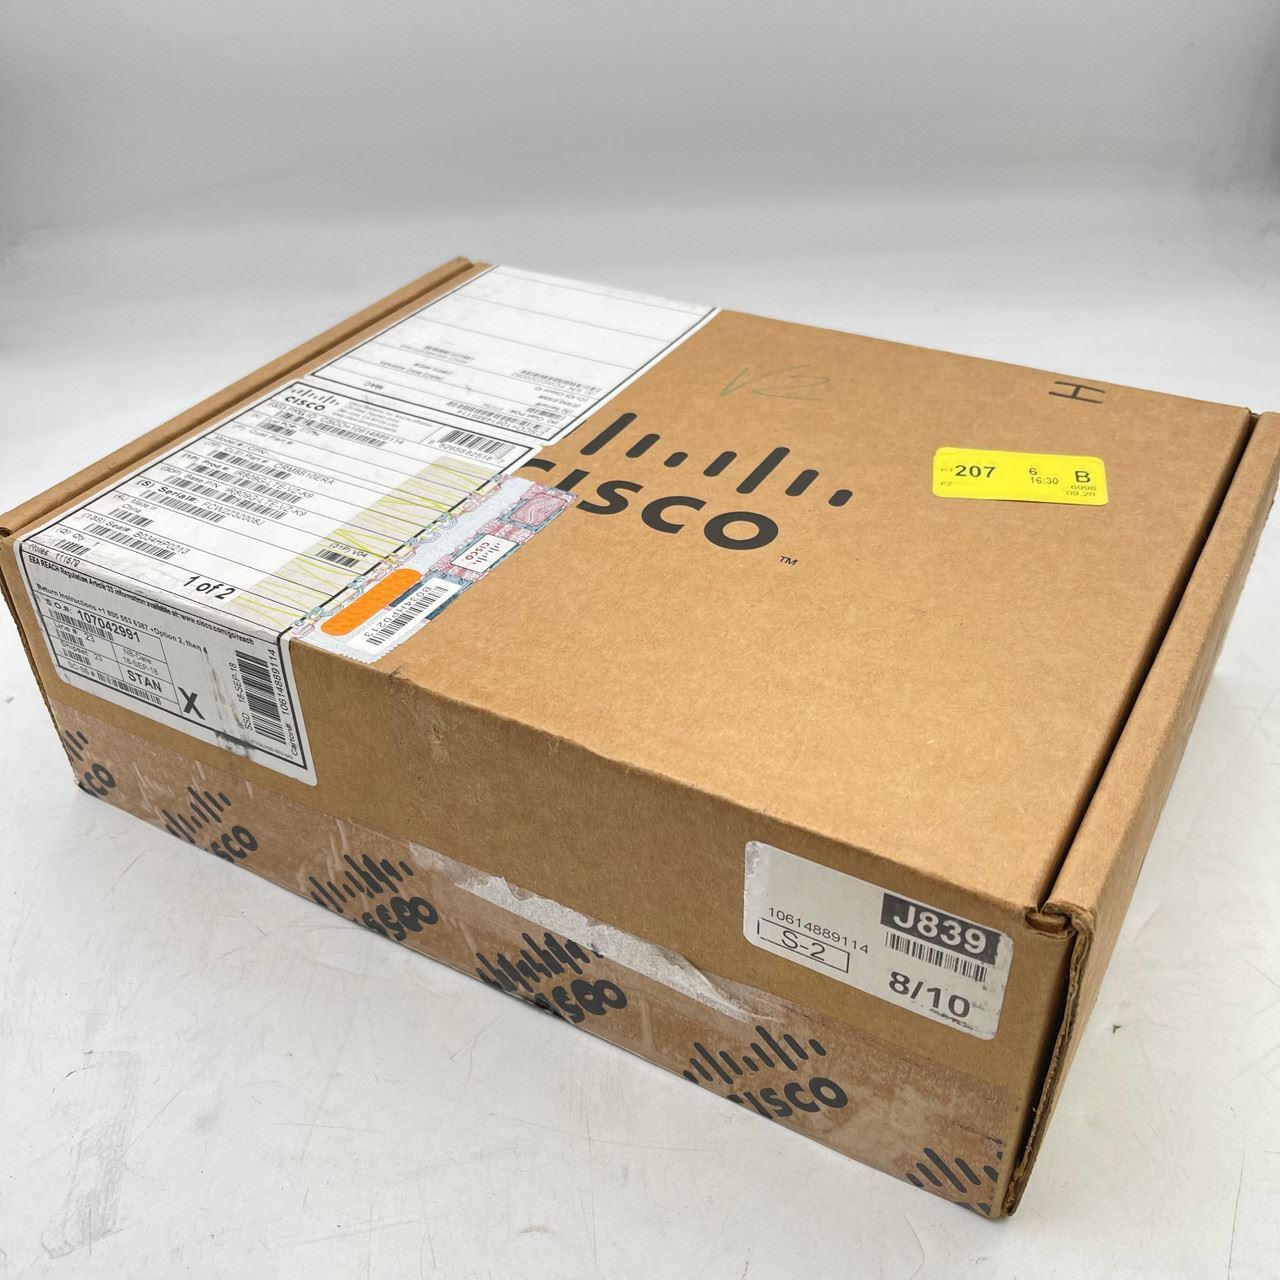 CISCO IR809G-LTE-VZ-K9 LTE INDUSTRIAL INTEGRATED SERVICES ROUTER - NEW